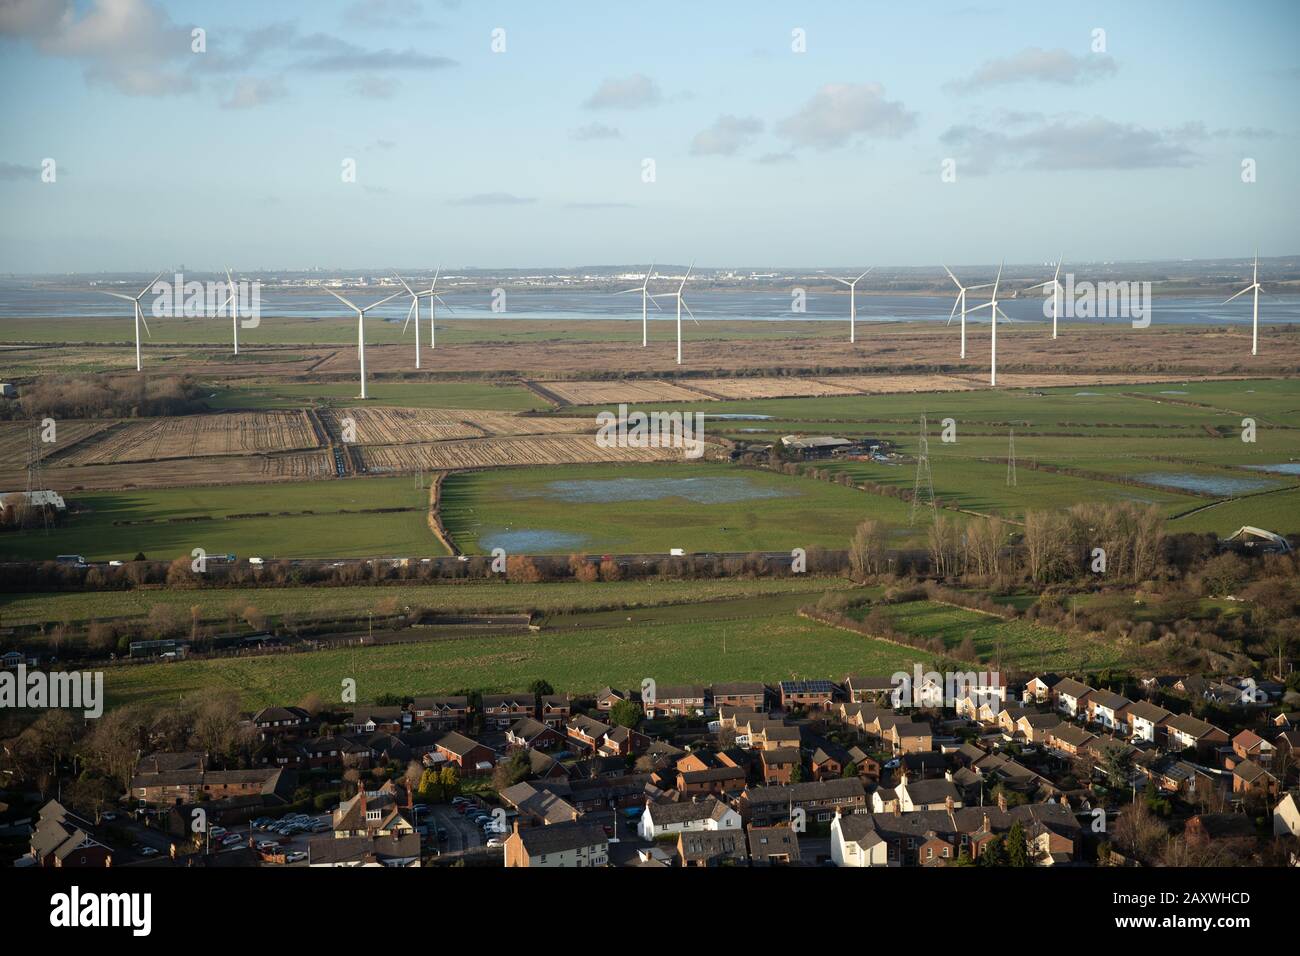 Frodsham, United Kingdom. 09 DEC 2019. Turbines generate electricity from wind power to supply the United Kingdom National Grid with energy at Frodsha Stock Photo